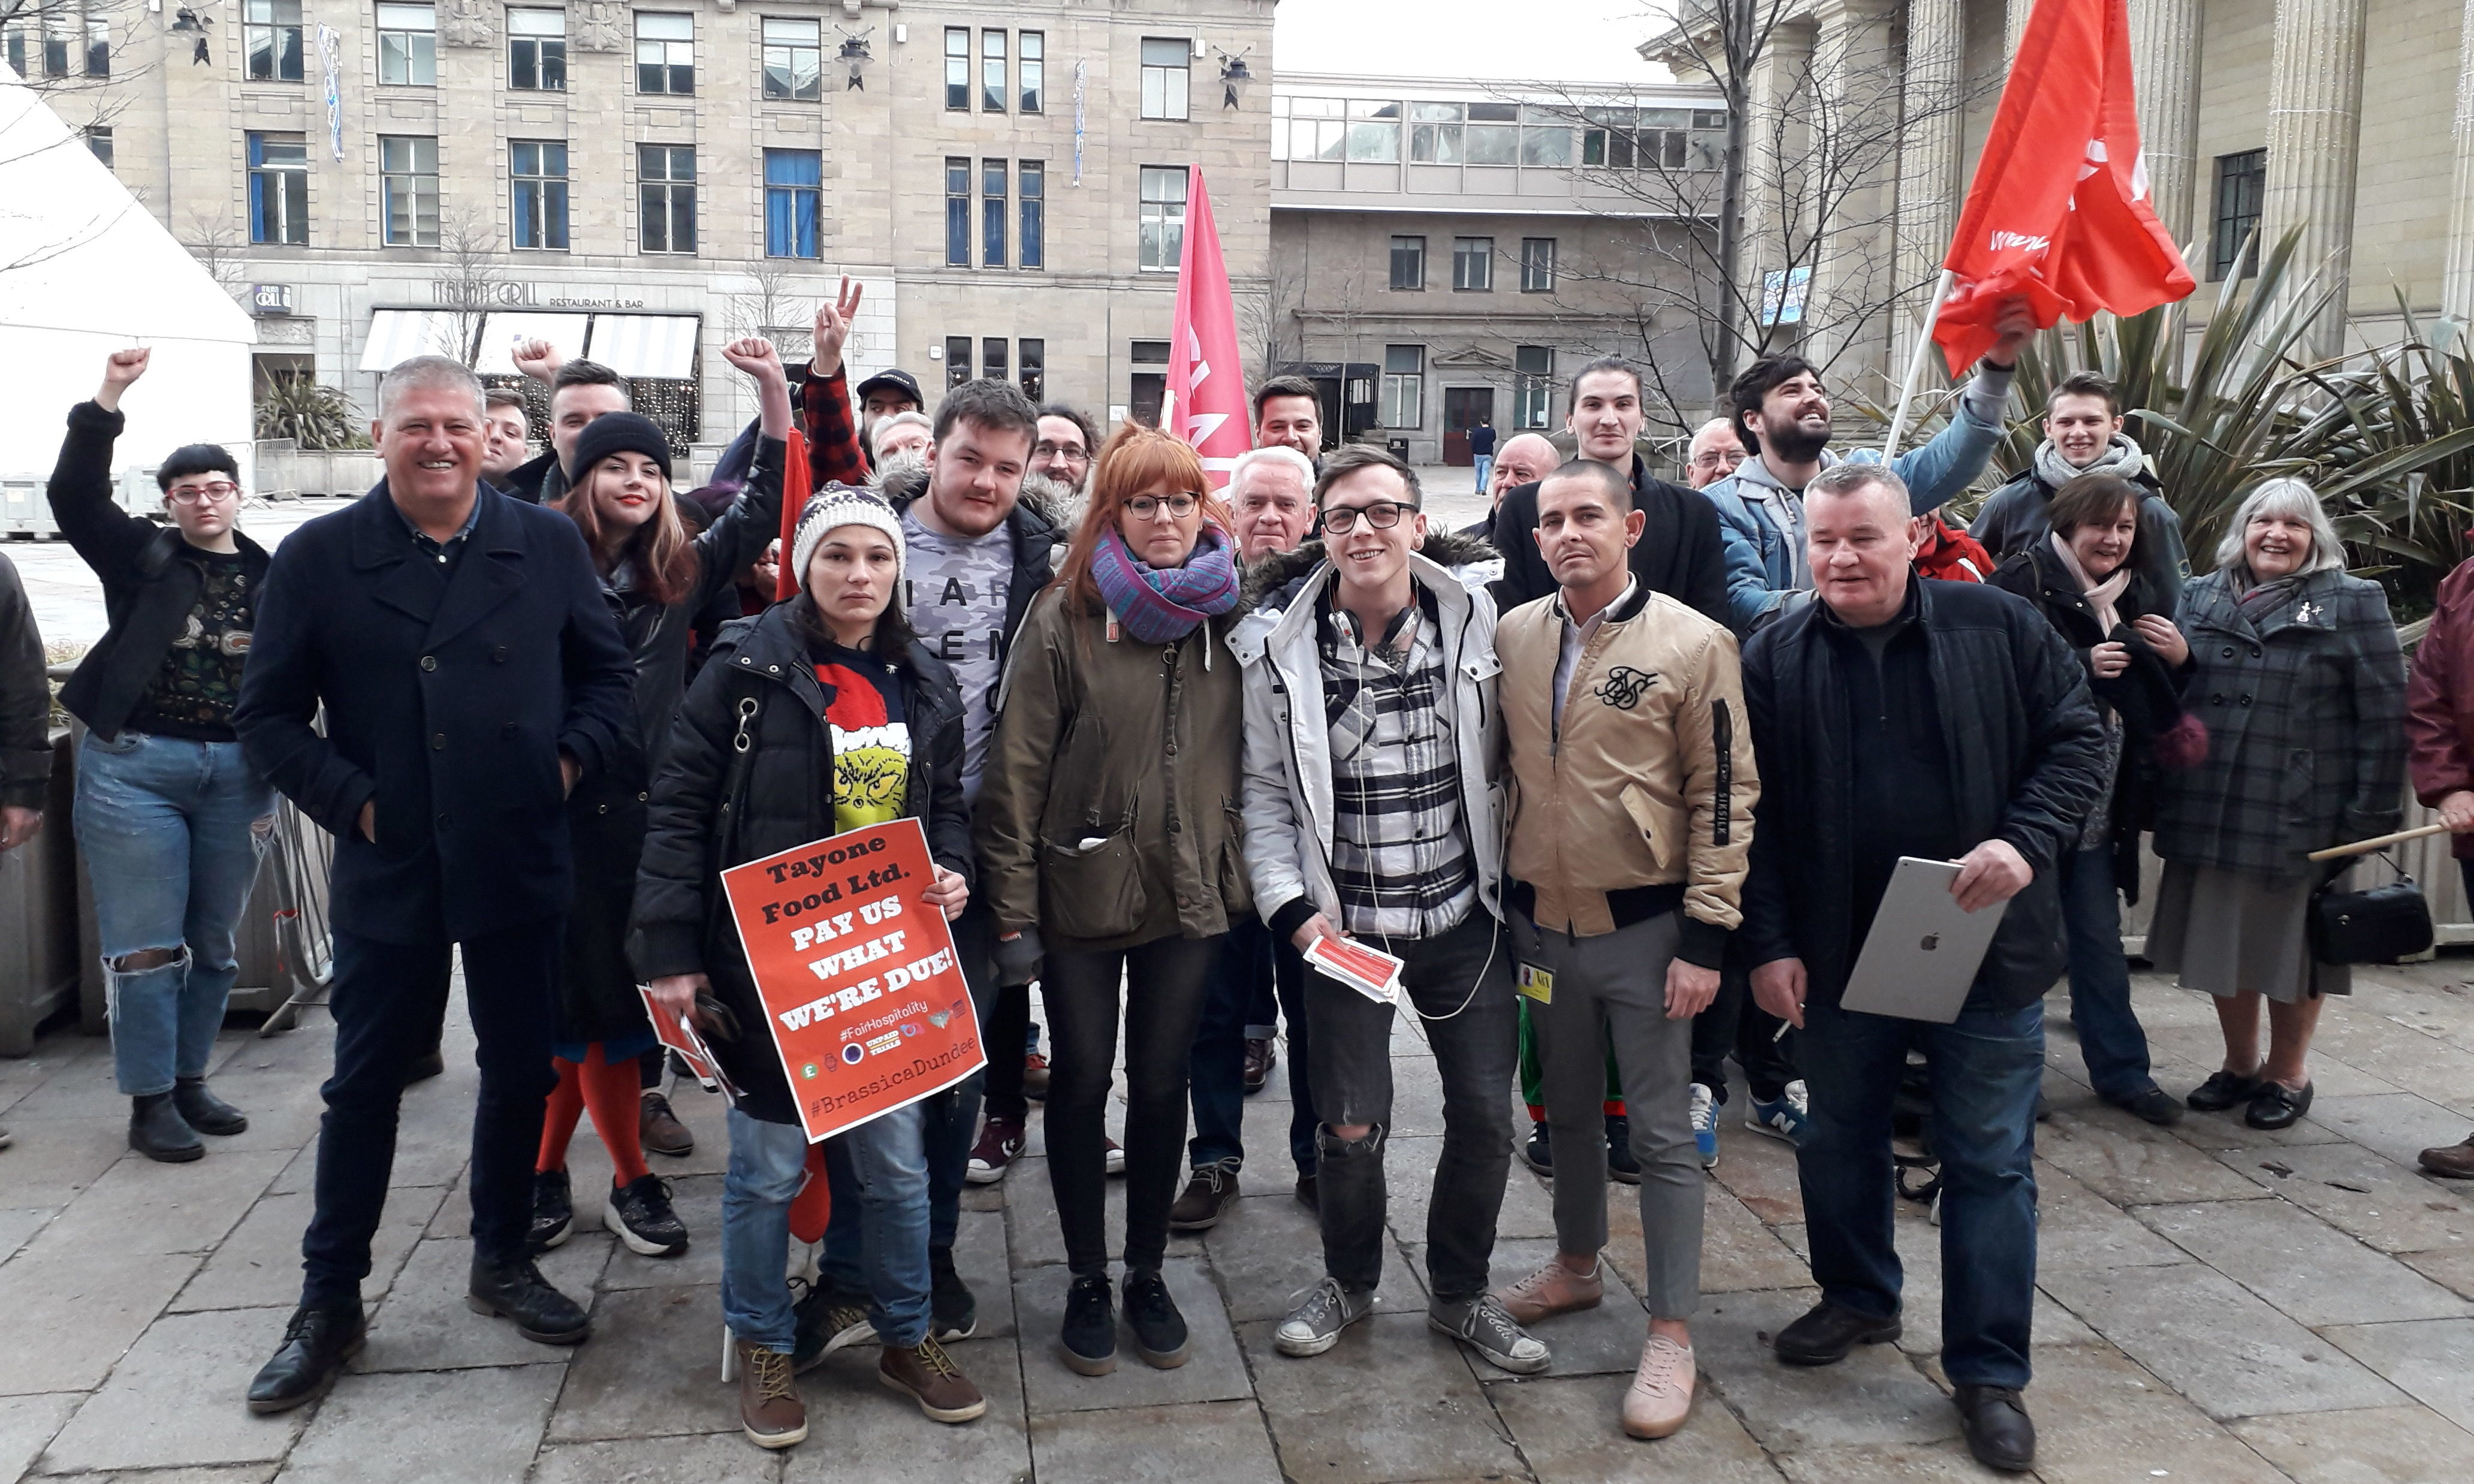 Union members and former Brassica employees celebrate their "small victory" outside the City Chambers on Thursday.